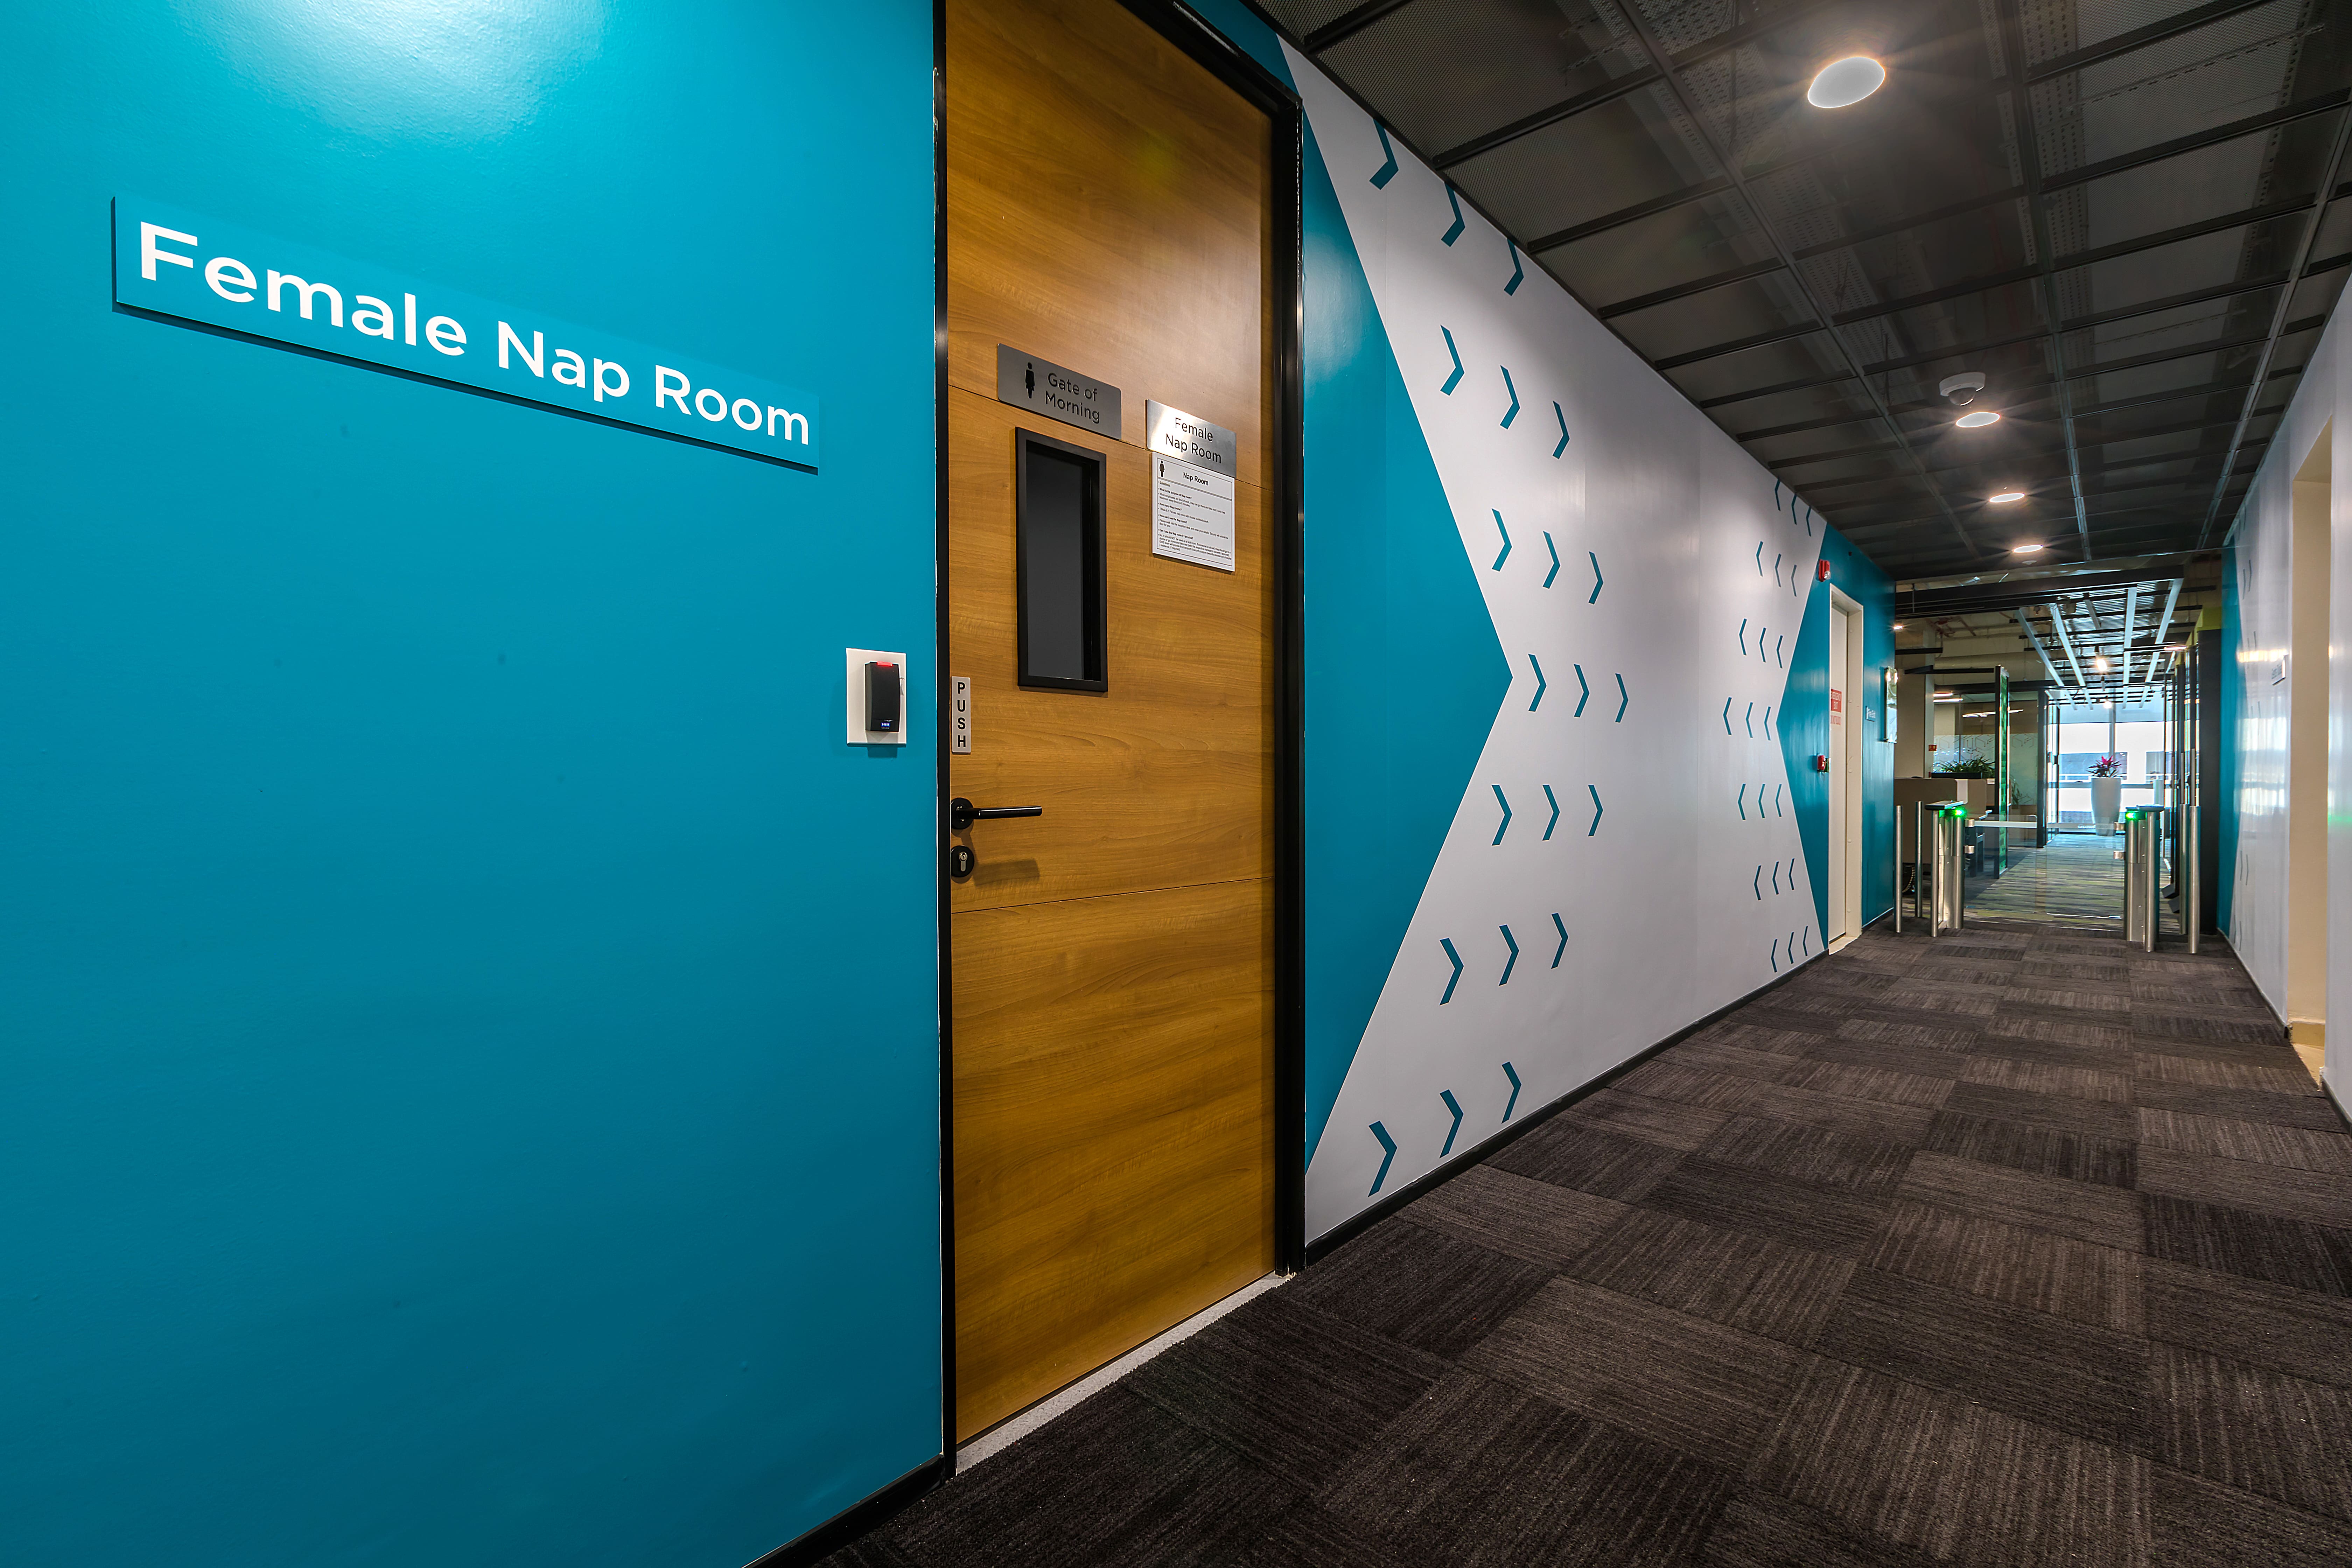 Nap rooms and mothers’ rooms have been designed by Space Matrix to cater to a diverse workplace